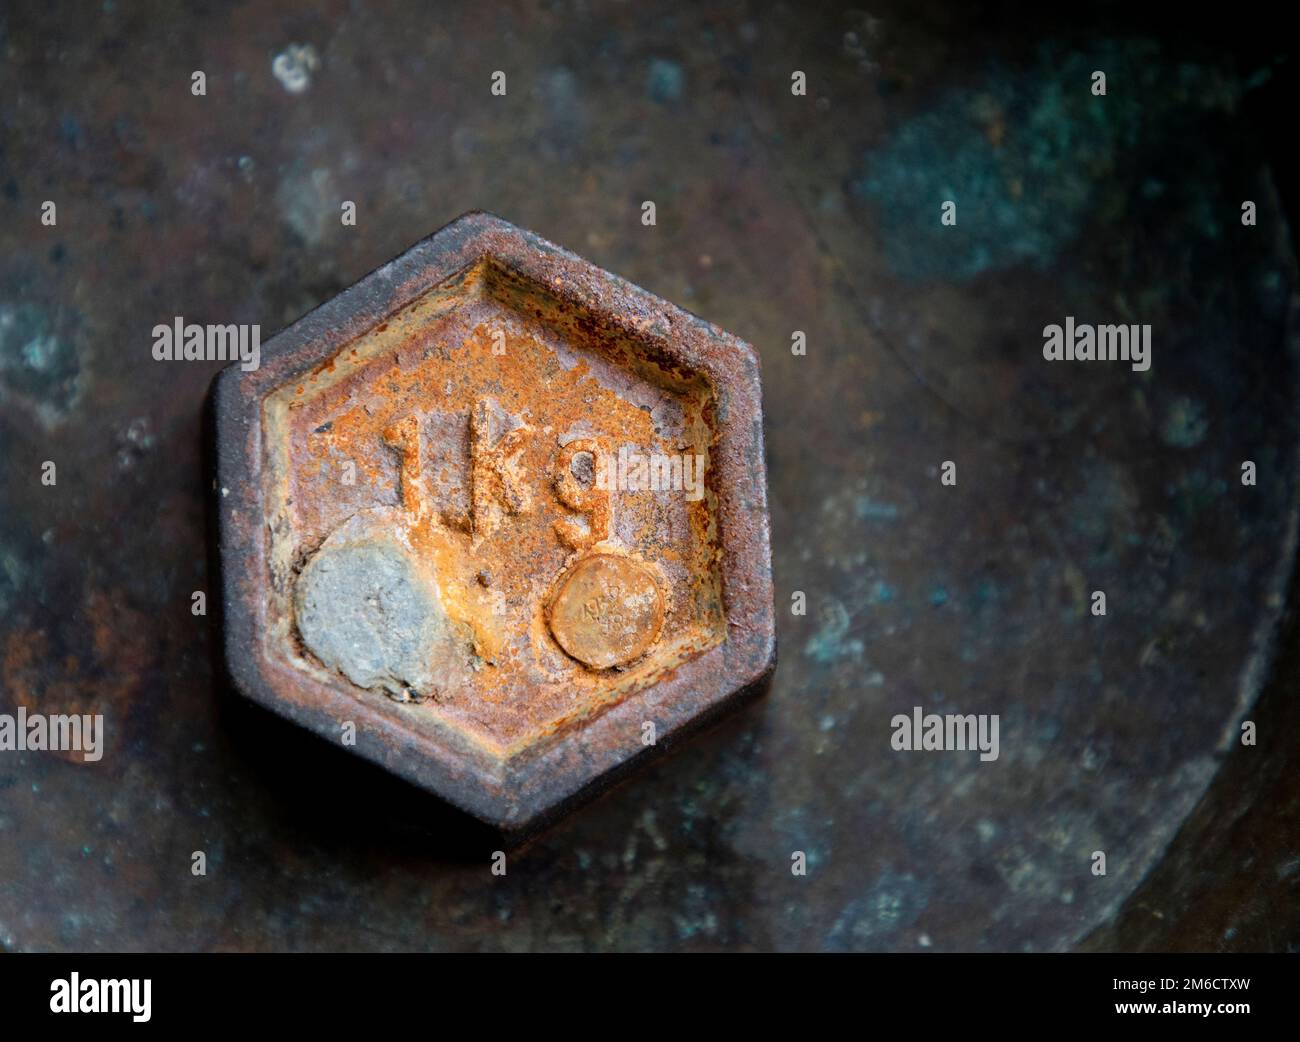 Kilogram scale hi-res stock photography and images - Alamy